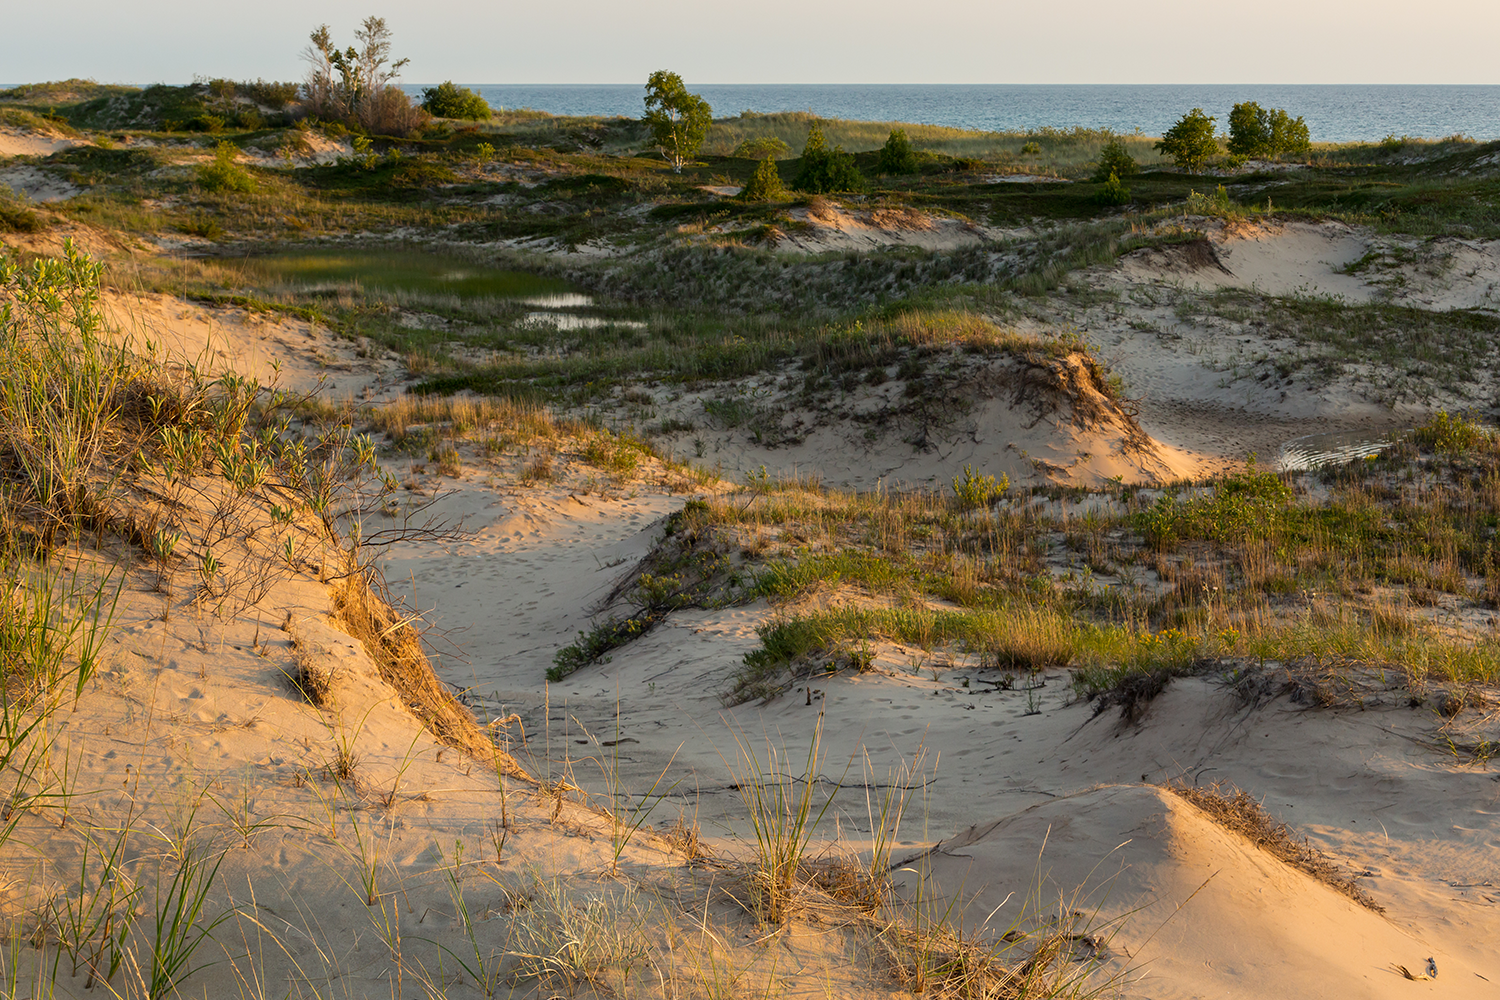 Rolling sand dunes with green grass along a lake shore. 